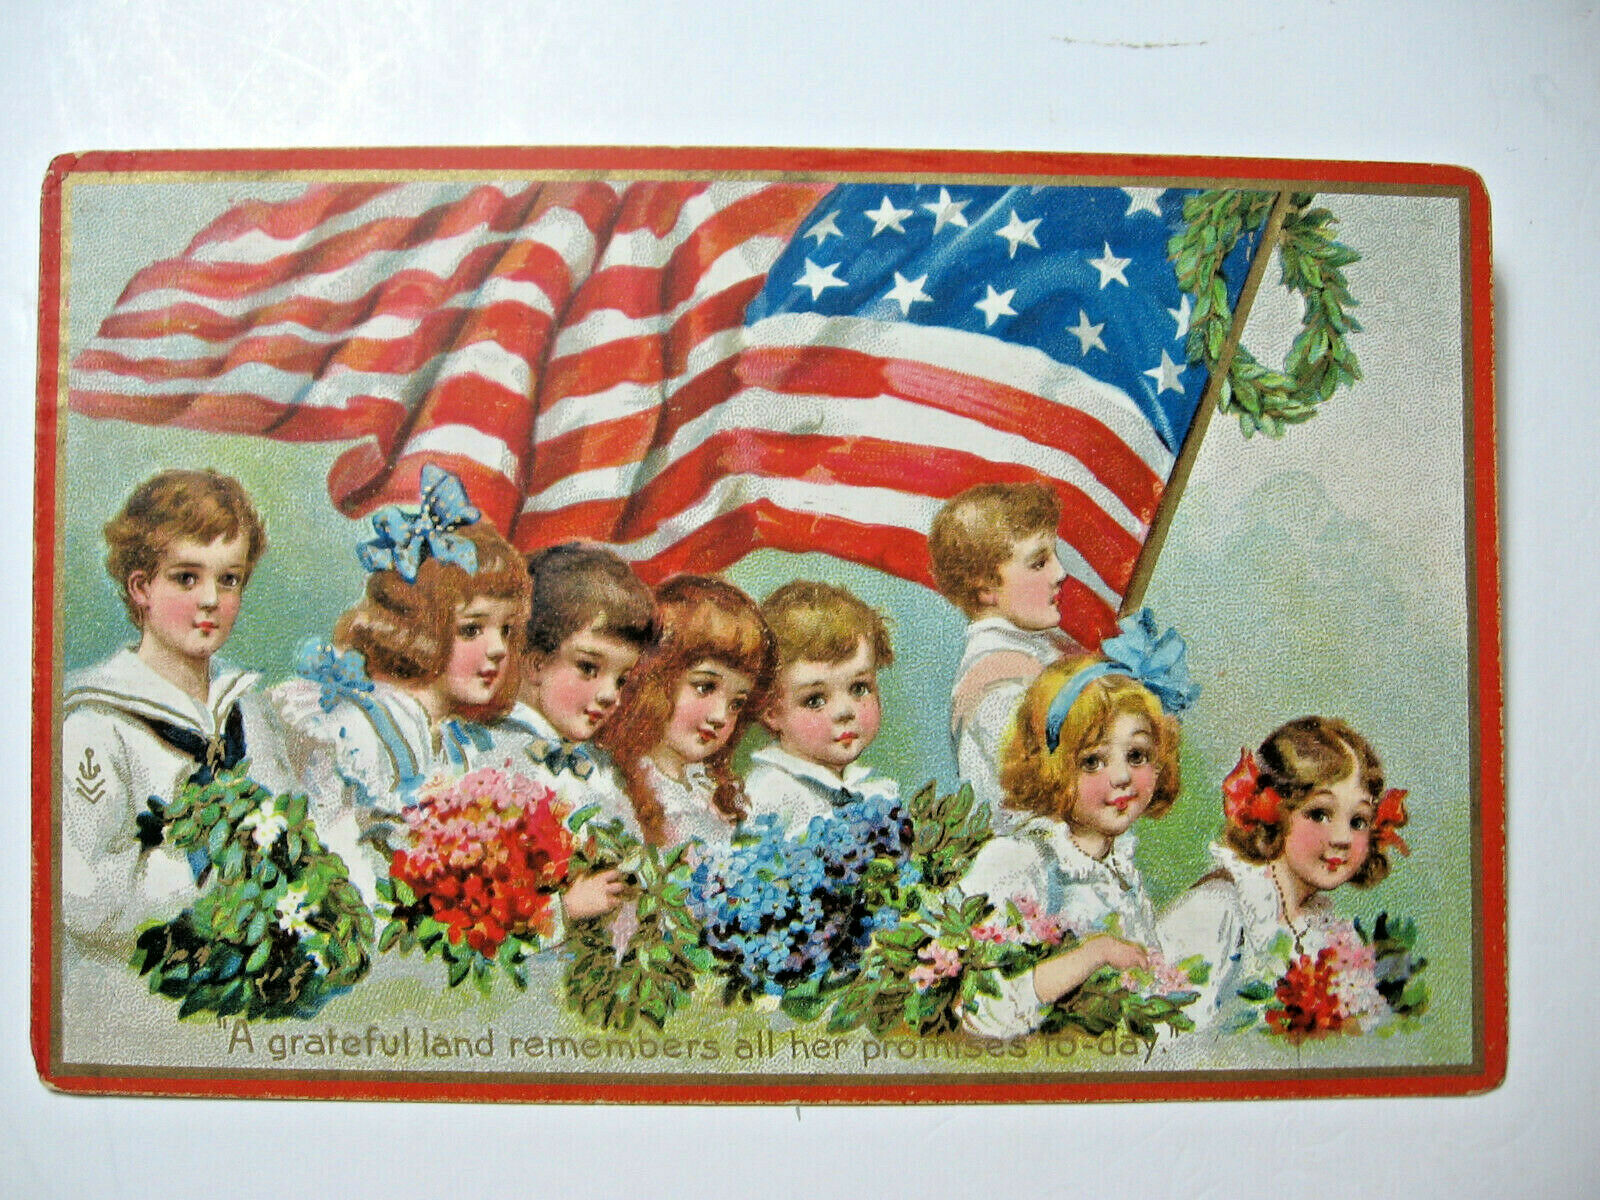 1918 Tuck's Decoration Day Message With Children Postcard